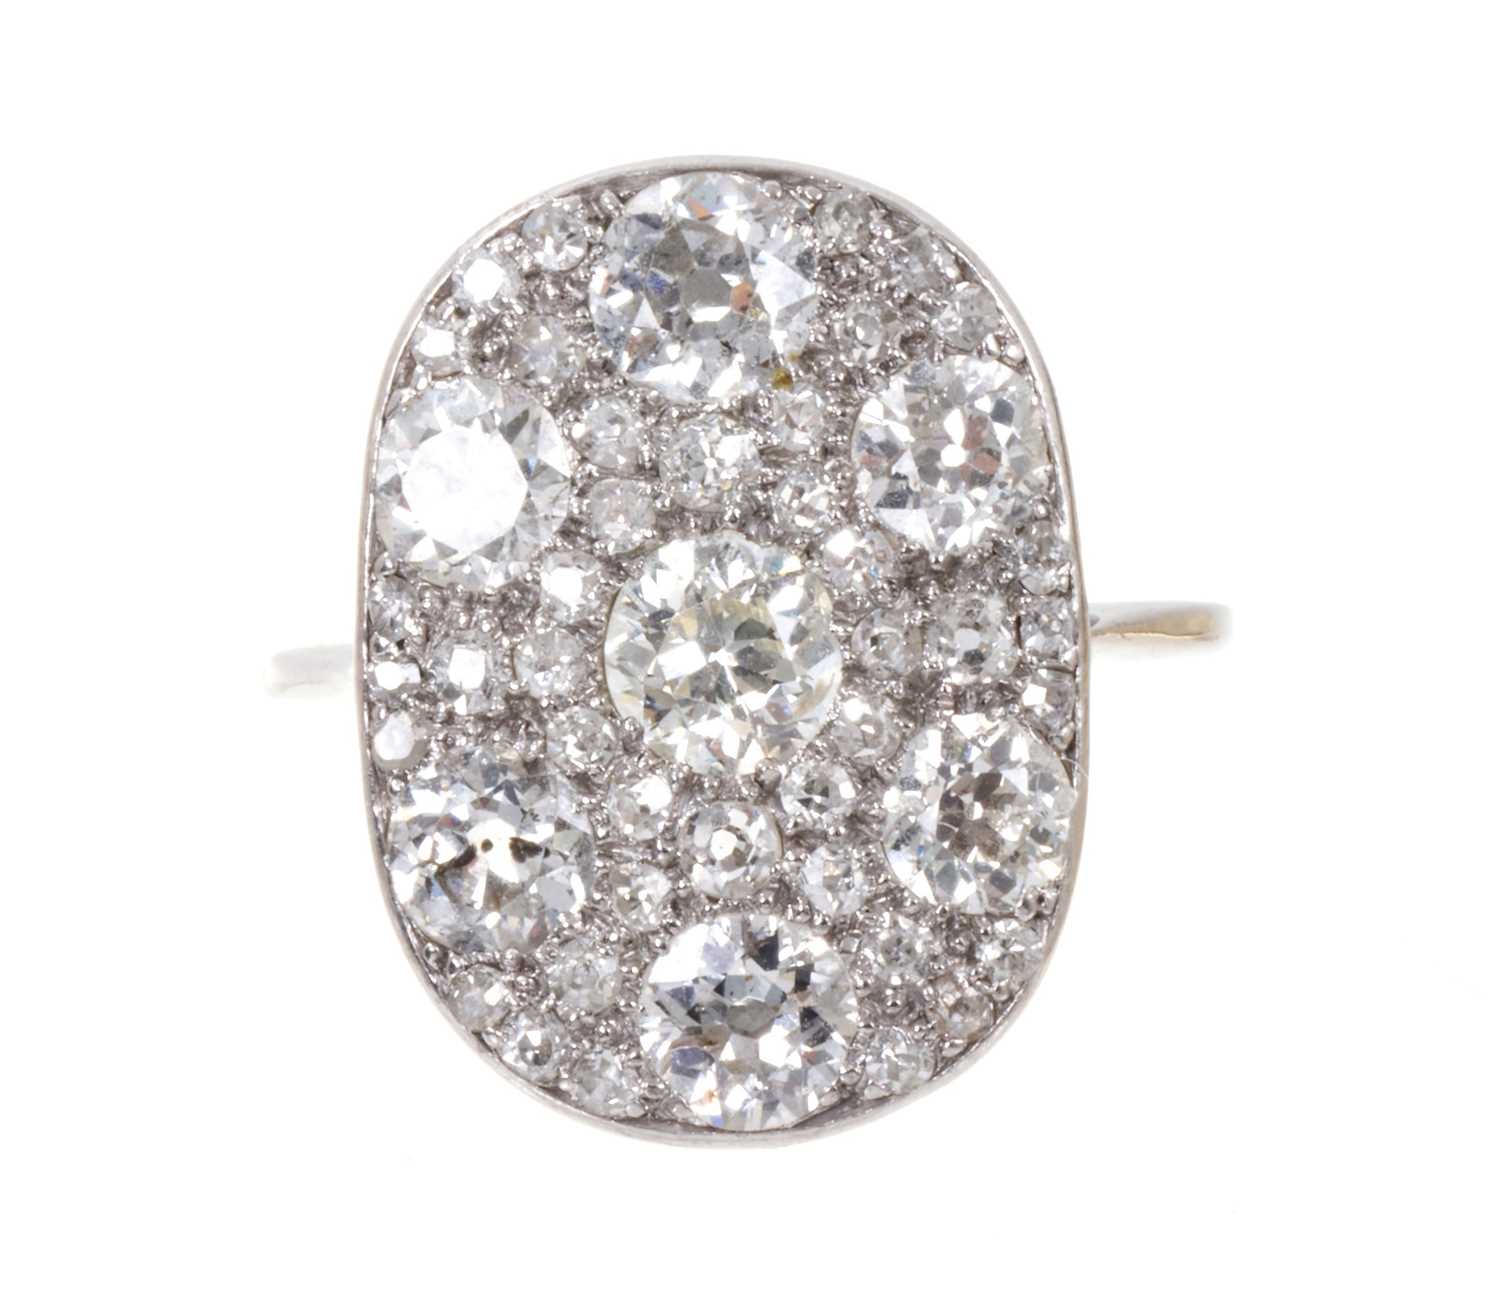 1920s diamond cluster cocktail ring - Image 2 of 6